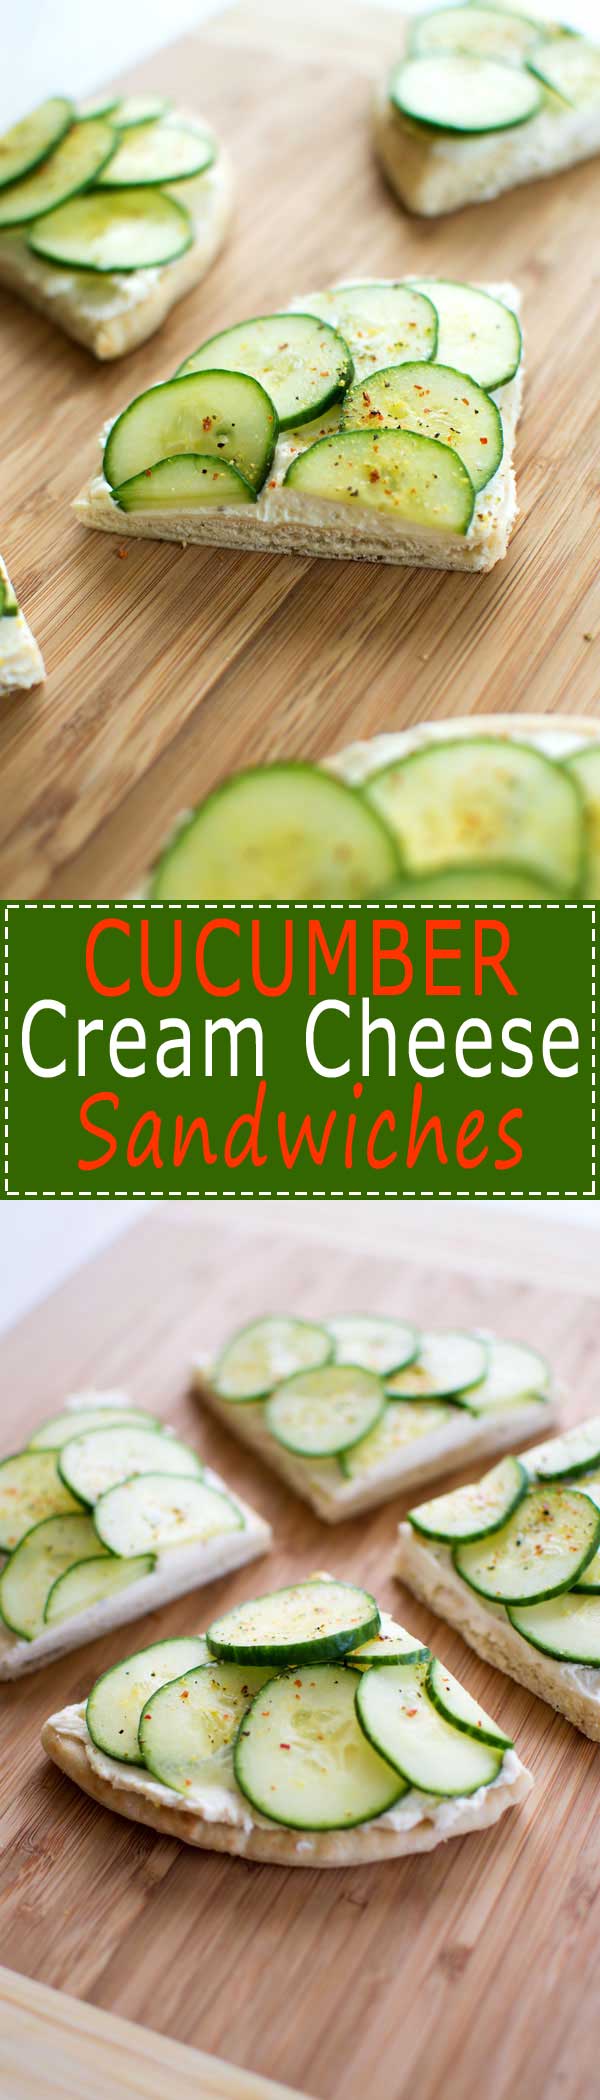 Cucumber Cream Cheese Sandwiches with zesty cream cheese and crisp cucumbers on soft pita bread!